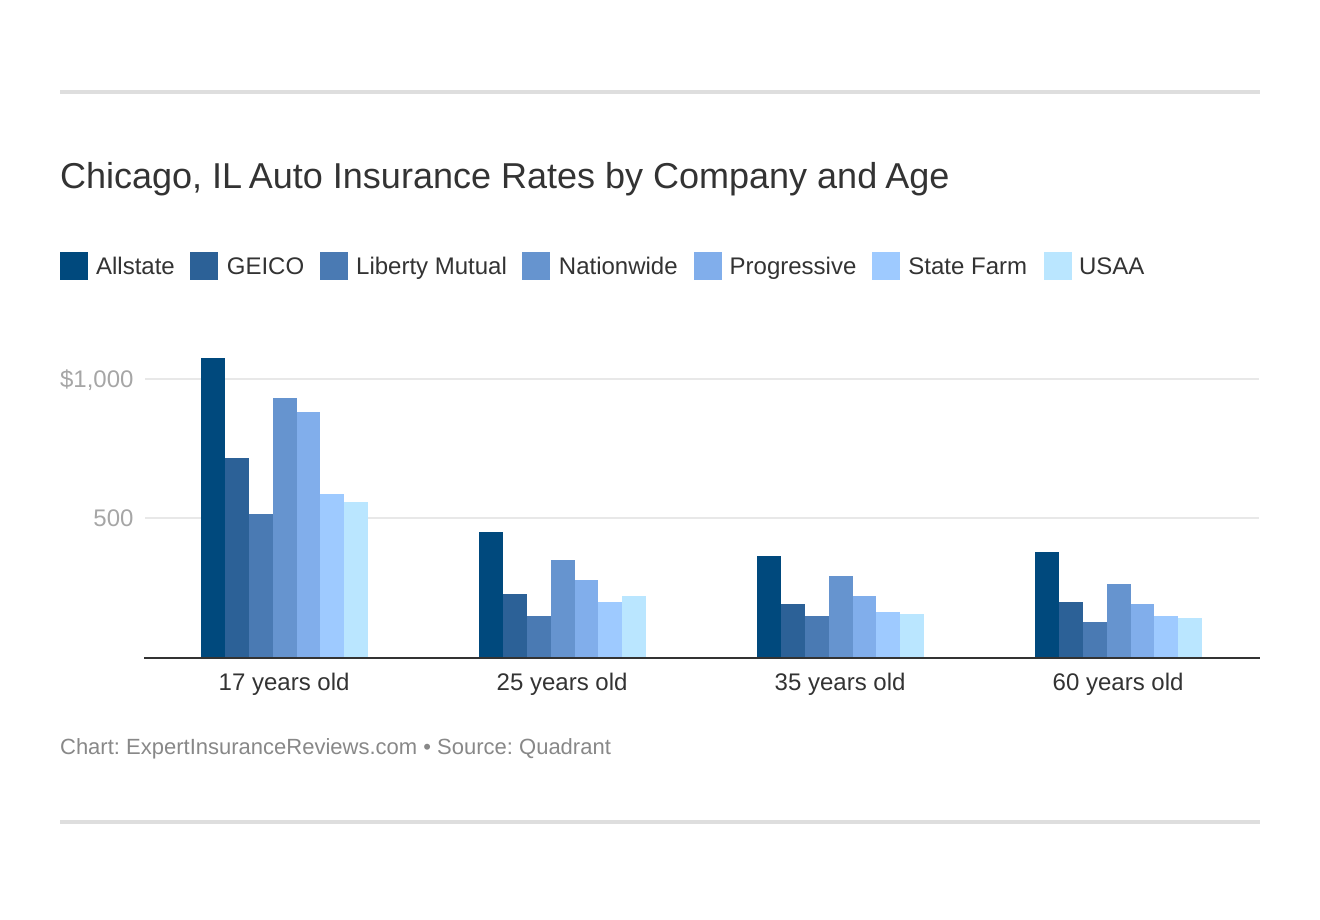 Chicago, IL Auto Insurance Rates by Company and Age